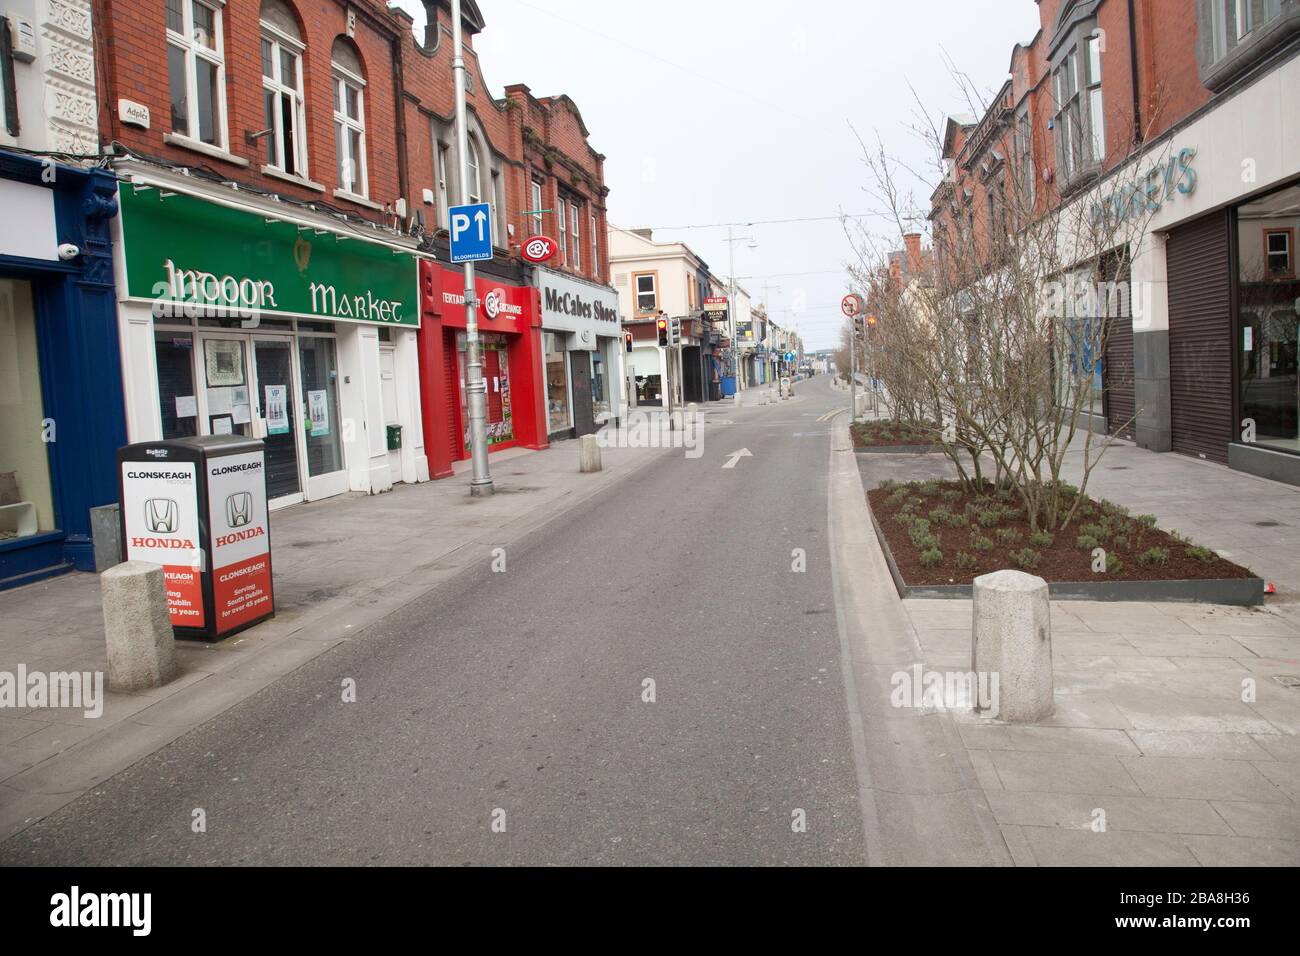 Dun Laoghaire Town, Dublin, Ireland. 26th March 2020. Retail stores and commercial businesses close their doors and streets empty in response to government restrictions and social distancing amid the Covid-19 pandemic crisis Credit: Doreen Kennedy/Alamy Live News Stock Photo